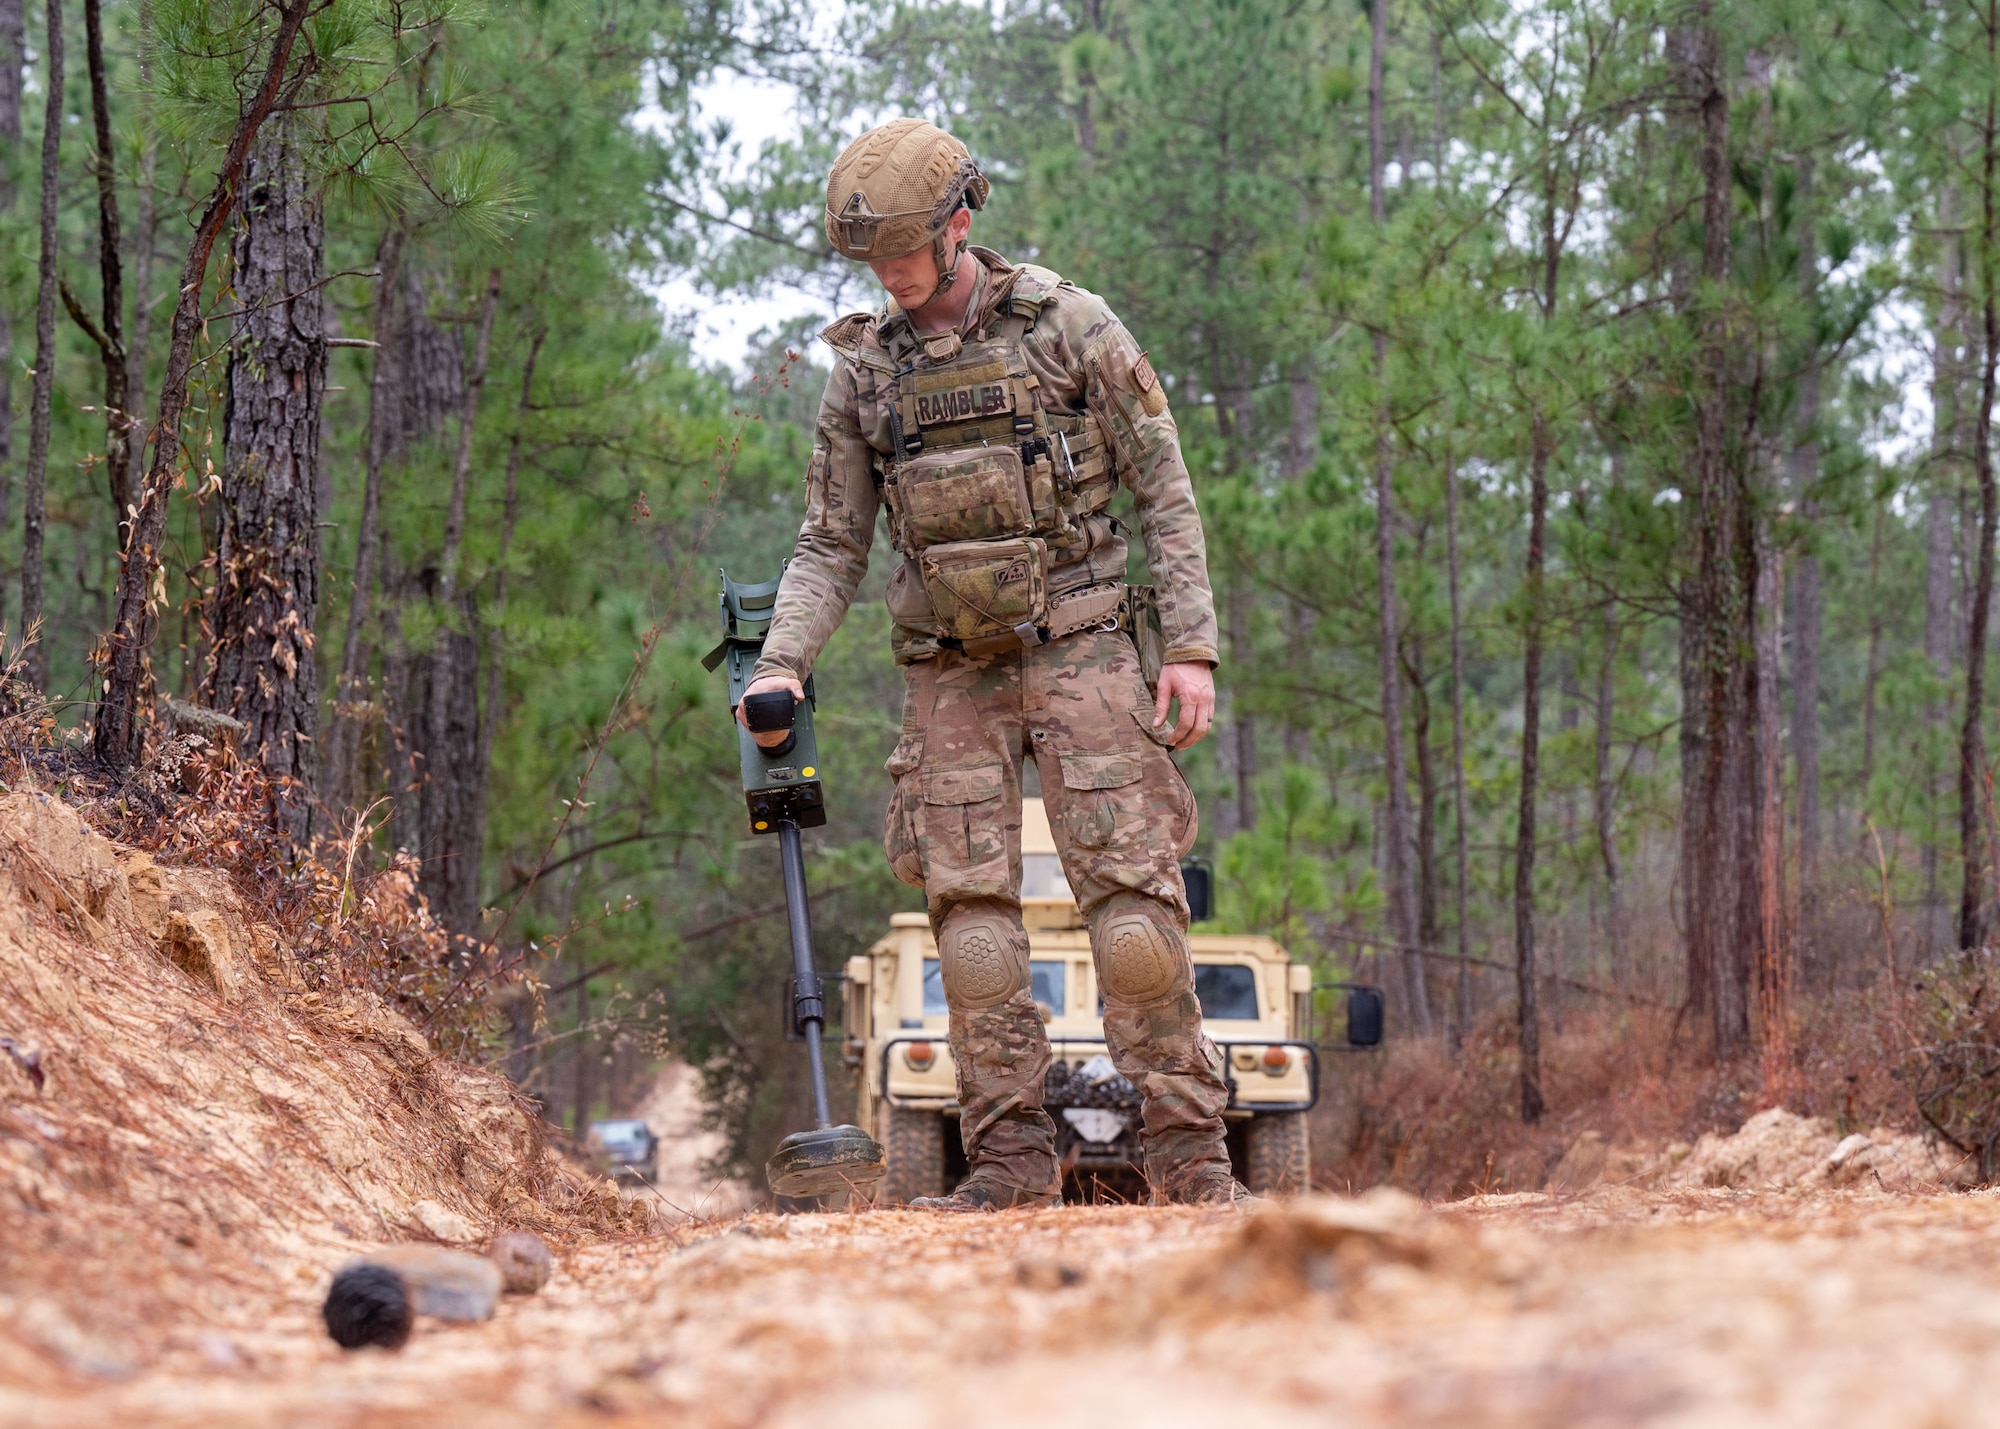 A man holds an EOD Minehound device to scan over the ground.